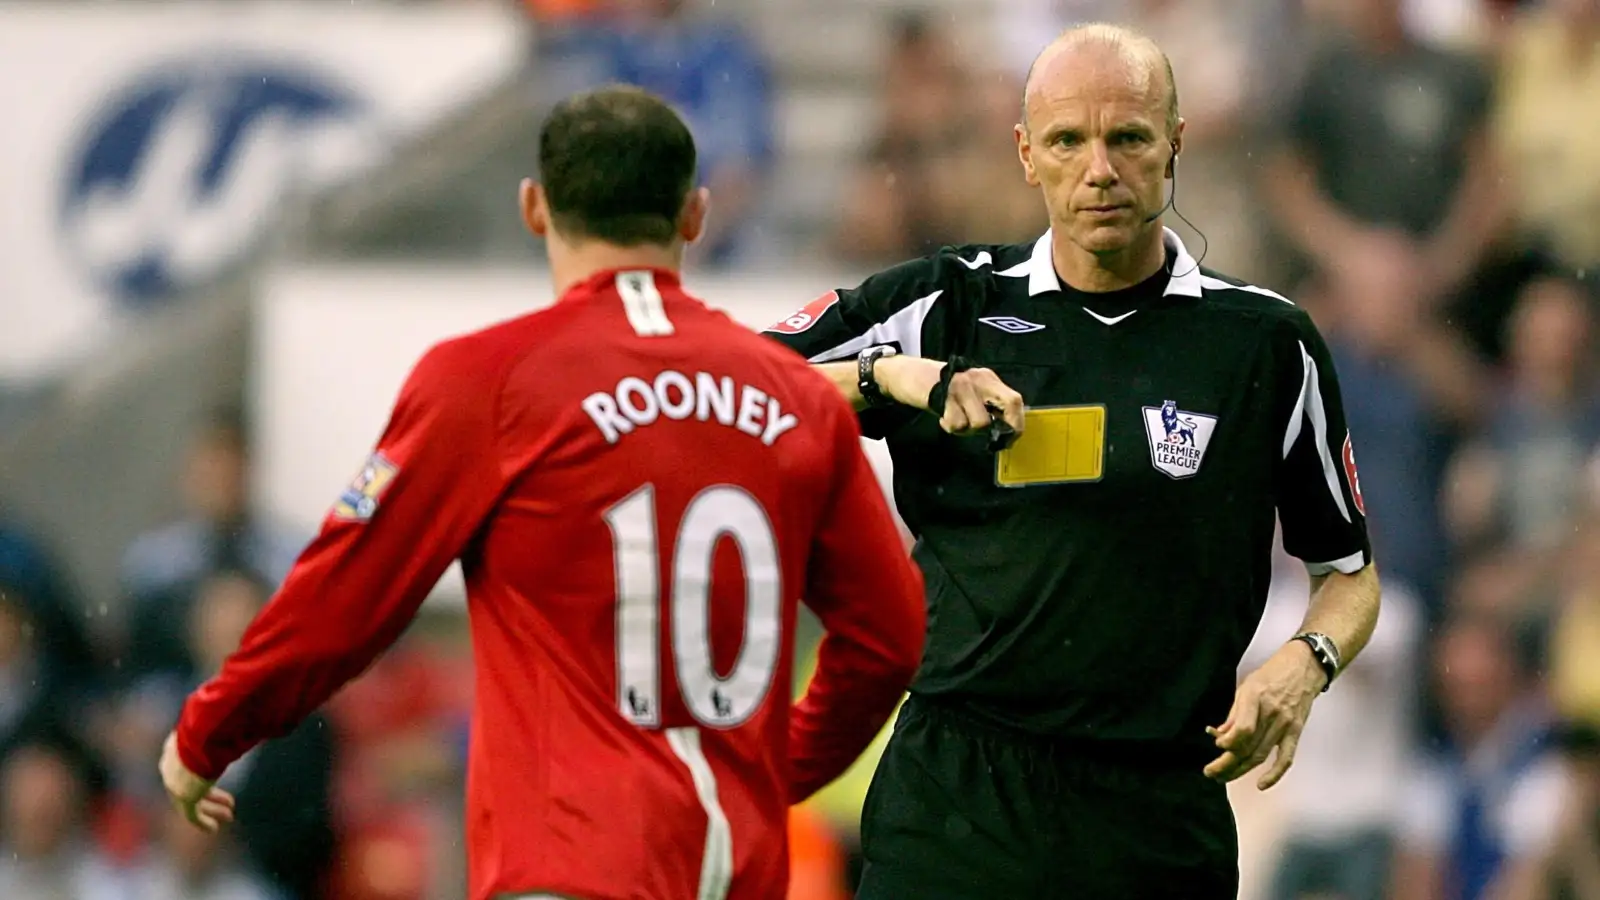 Can you name the 30 players with the most bookings in Premier League history?